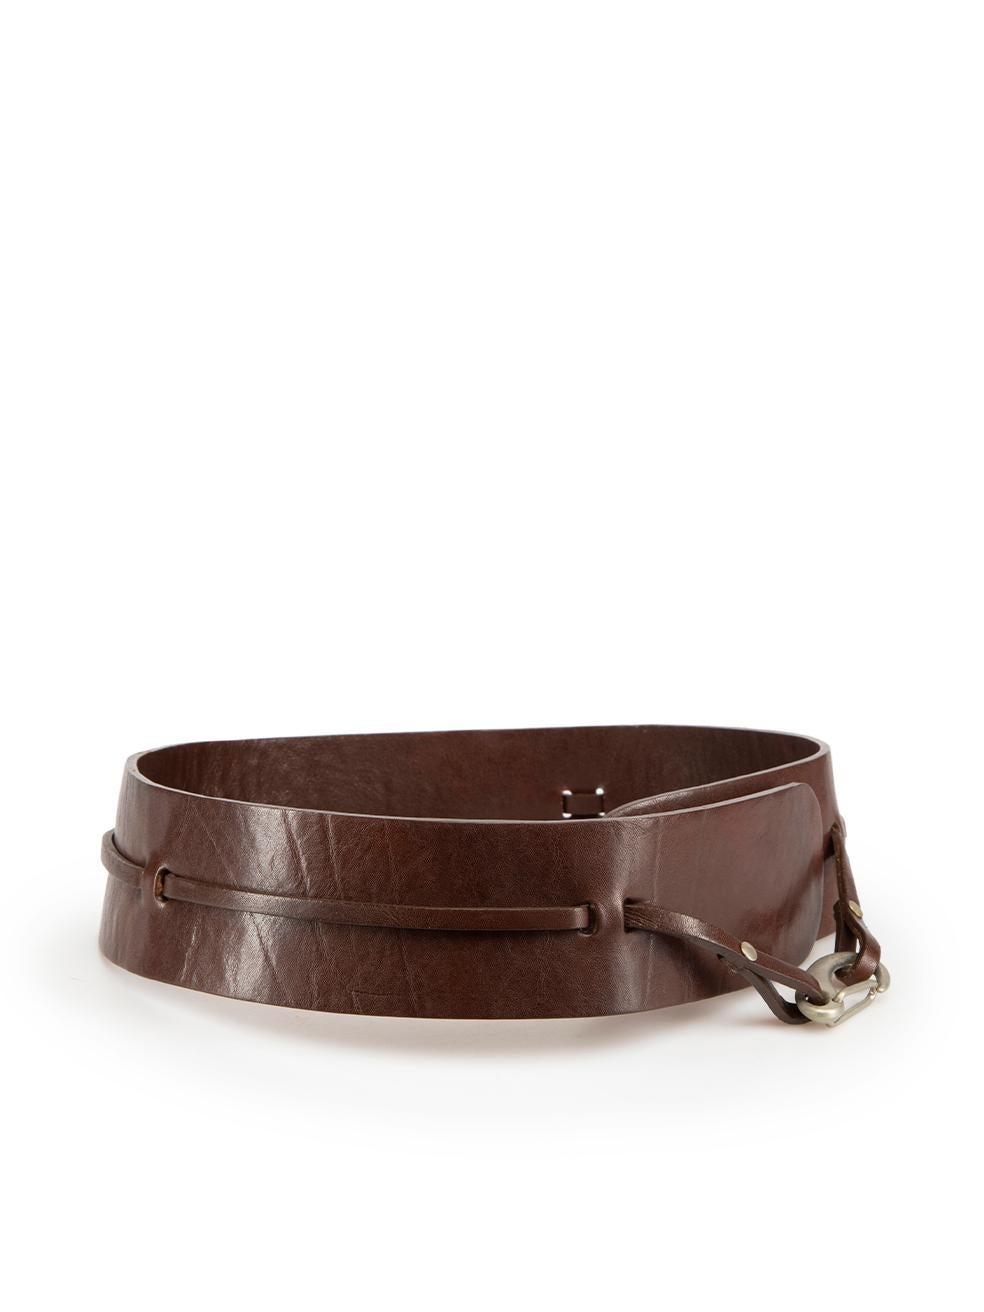 CONDITION is Good. Minor wear to belt is evident. Light wear to clasp fastening and hardware components which are mildly tarnished. Creasing of the leather is also seen on this used Brunello Cucinelli designer resale item.
 
 Details
 Brown
